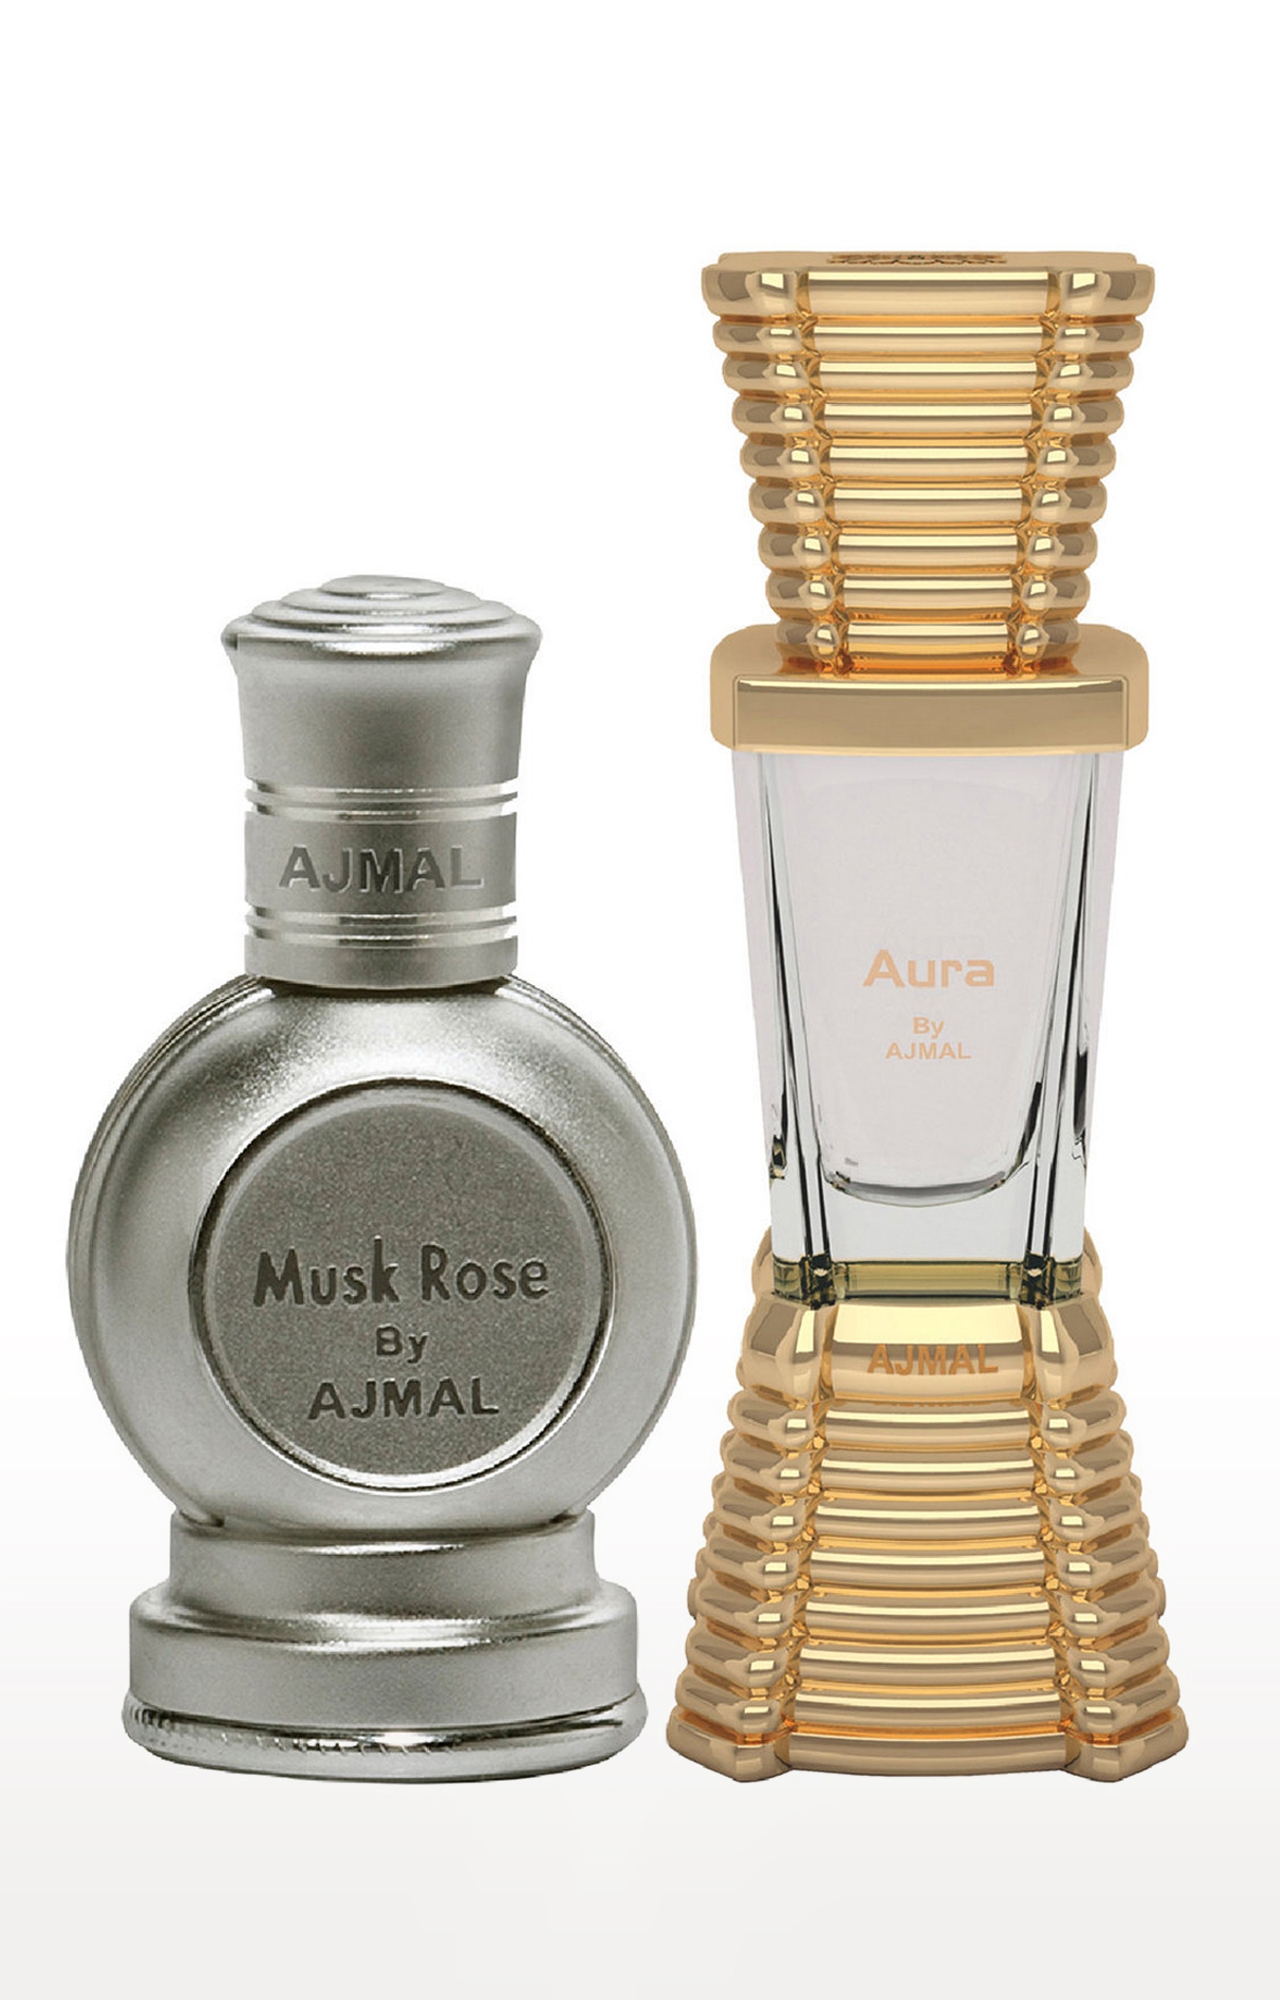 Ajmal | Ajmal Musk Rose Concentrated Perfume Oil Floral Musky Alcohol- Attar 12Ml For Unisex And Aura Concentrated Perfume Oil Floral Fruity Alcohol- Attar 10Ml For Unisex 